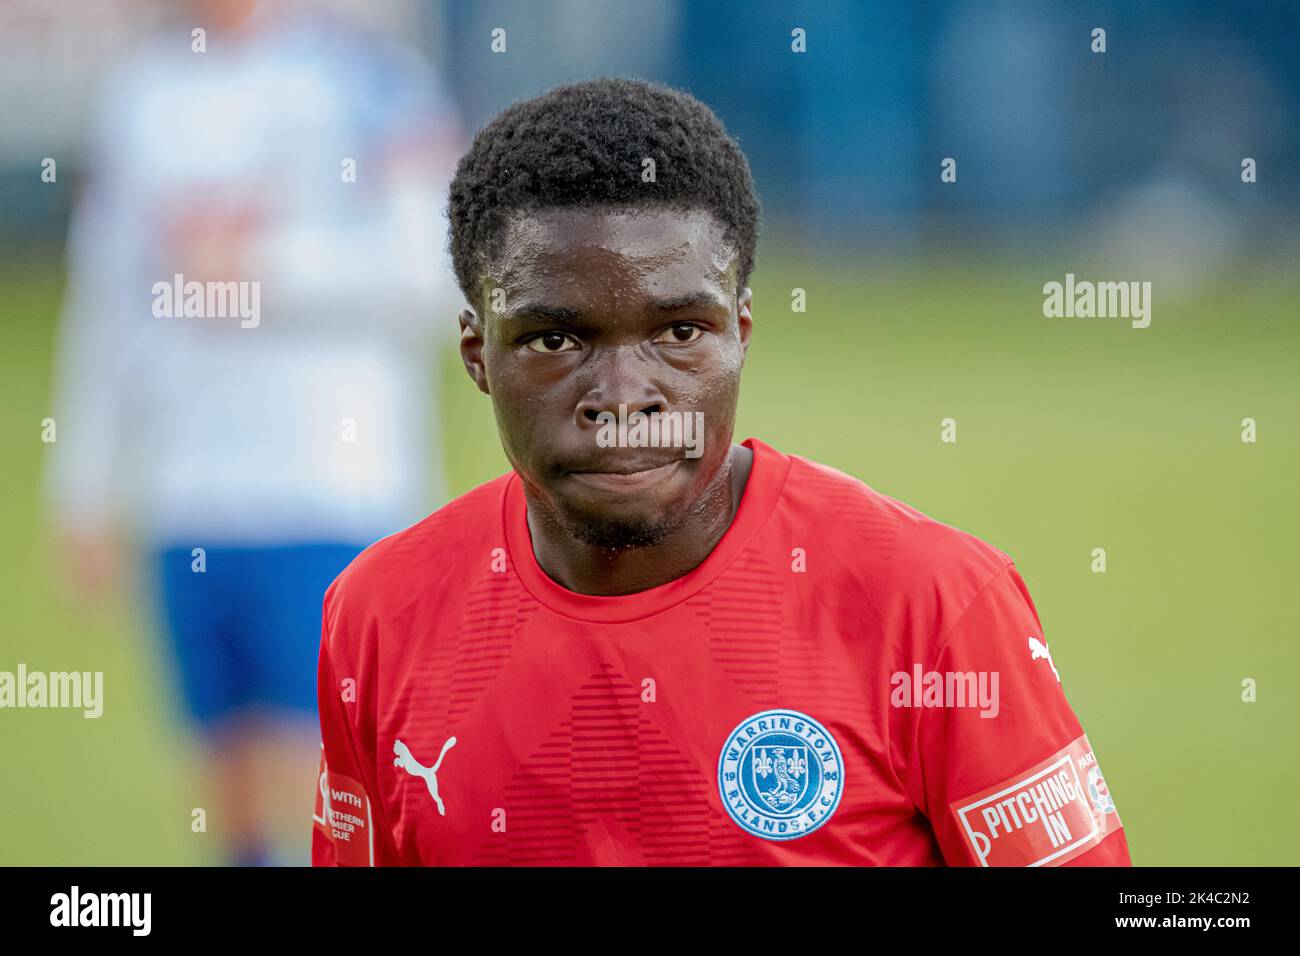 Salford City's Kelly N'Mai on loan with Warrington Rylands, Nethermoor Park, Guiseley, Leeds, England, 1st October 2022. Credit Mark Percy/Alamy Stock Stock Photo